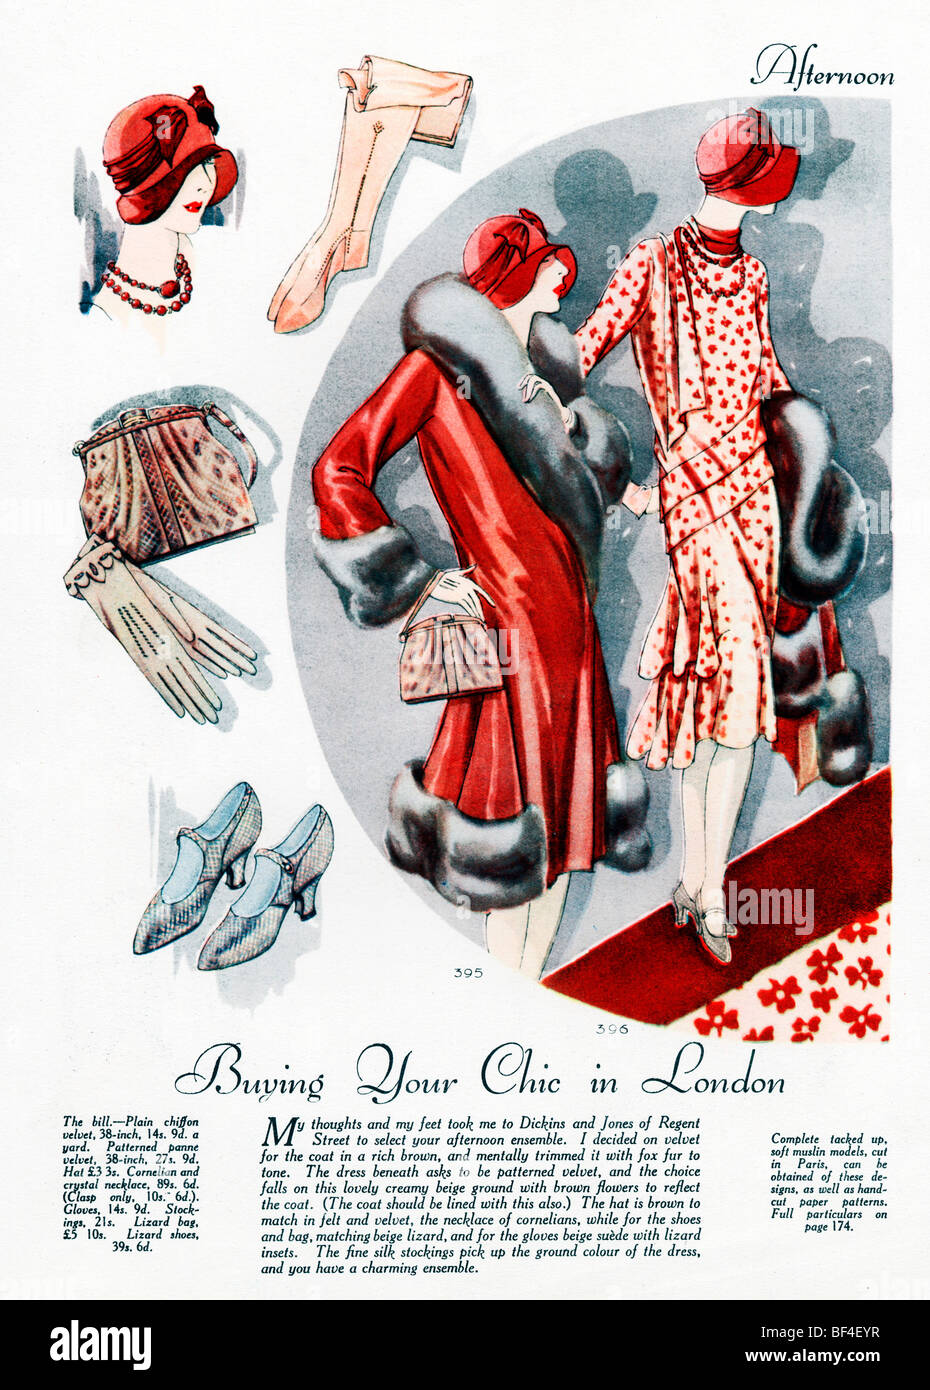 Afternoon Accessories, 1926 English fashion, Buying your Chic in London with a trip to Dickins and Jones of Regent Street Stock Photo